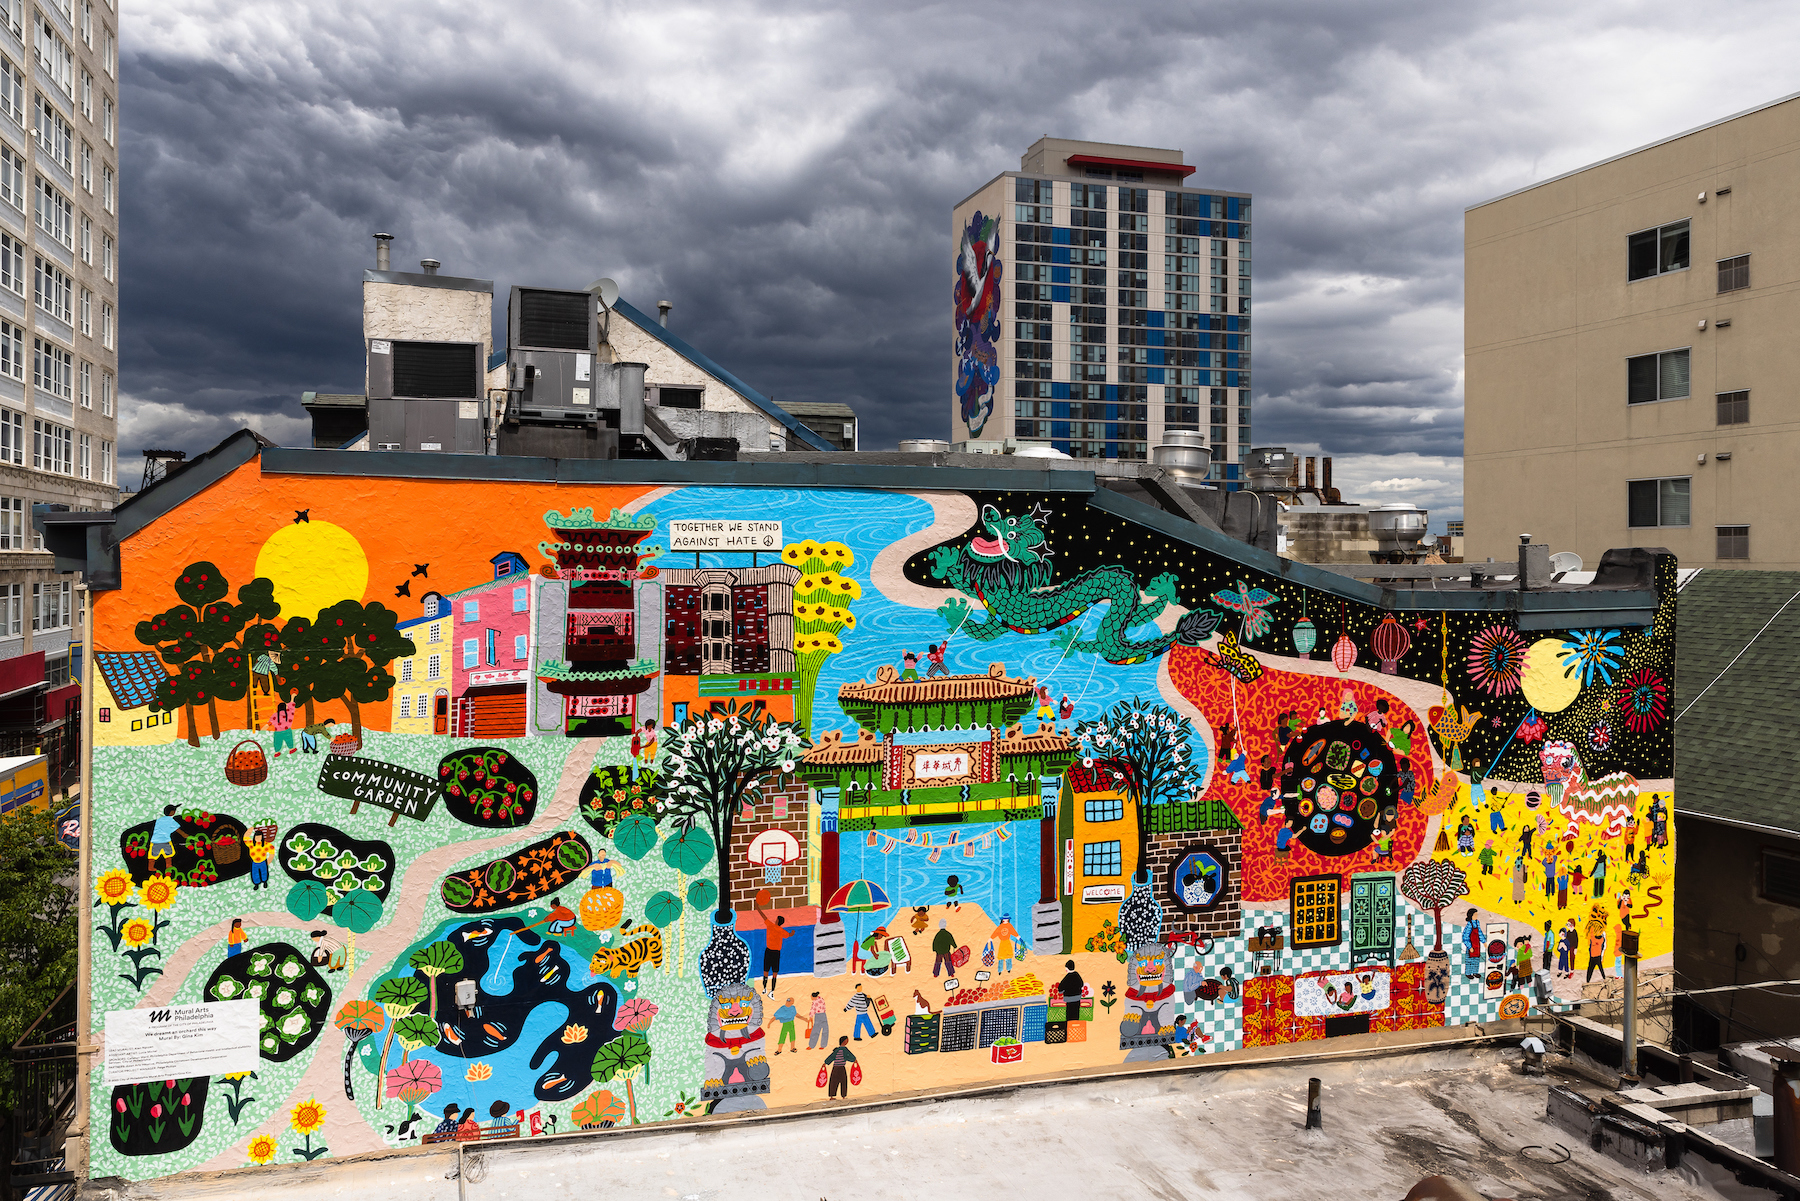 A large colorful mural of an orchard painted on the side of a building in the city.